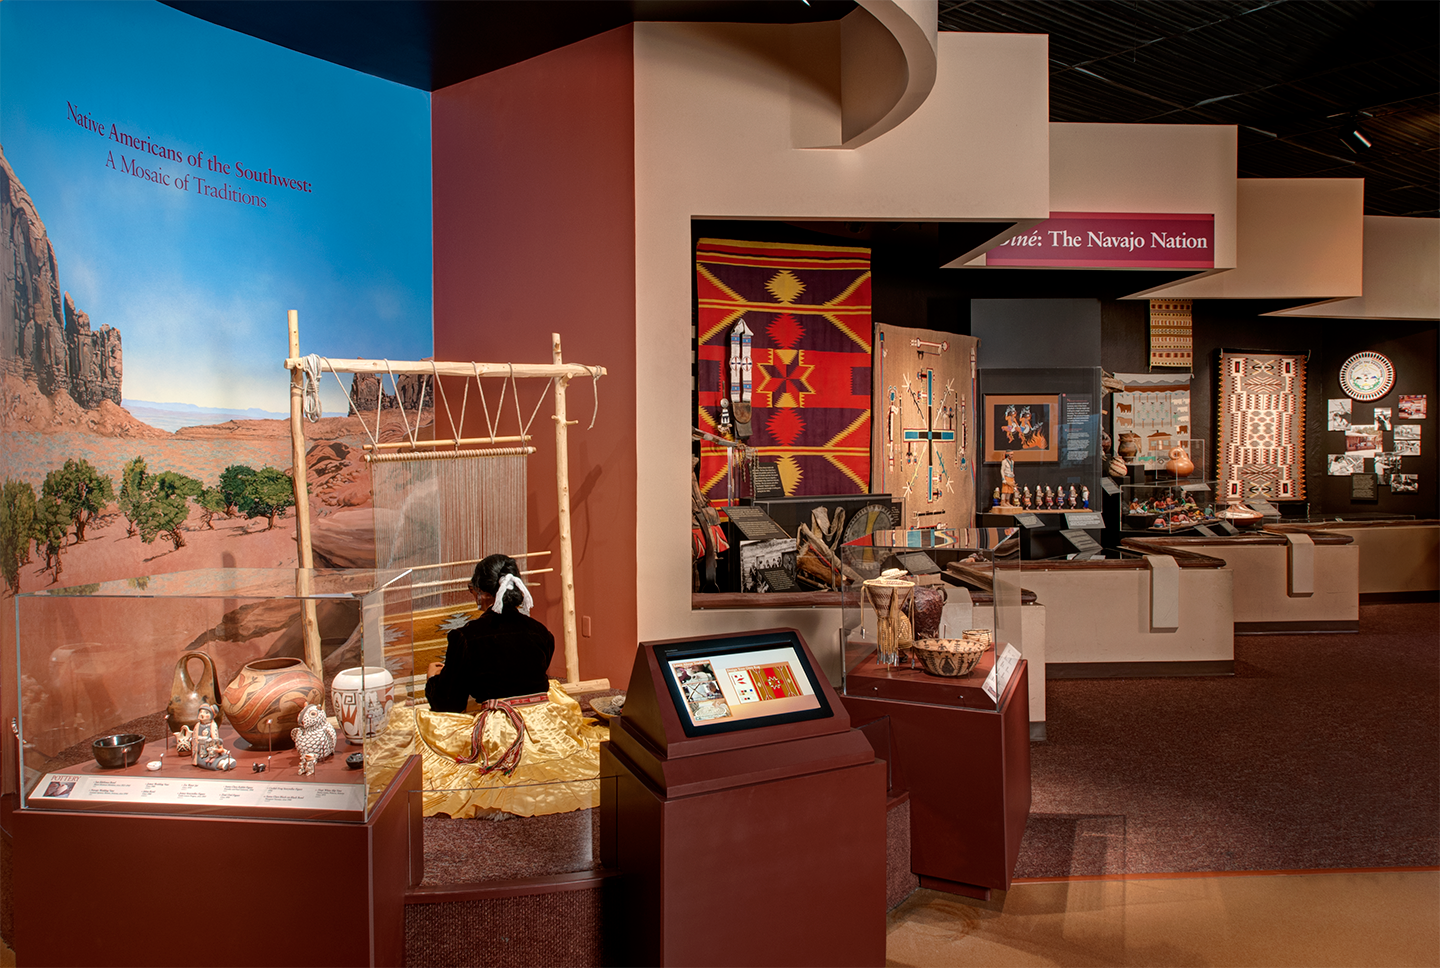 An exhibit within the Denver Museum of Nature & Science 